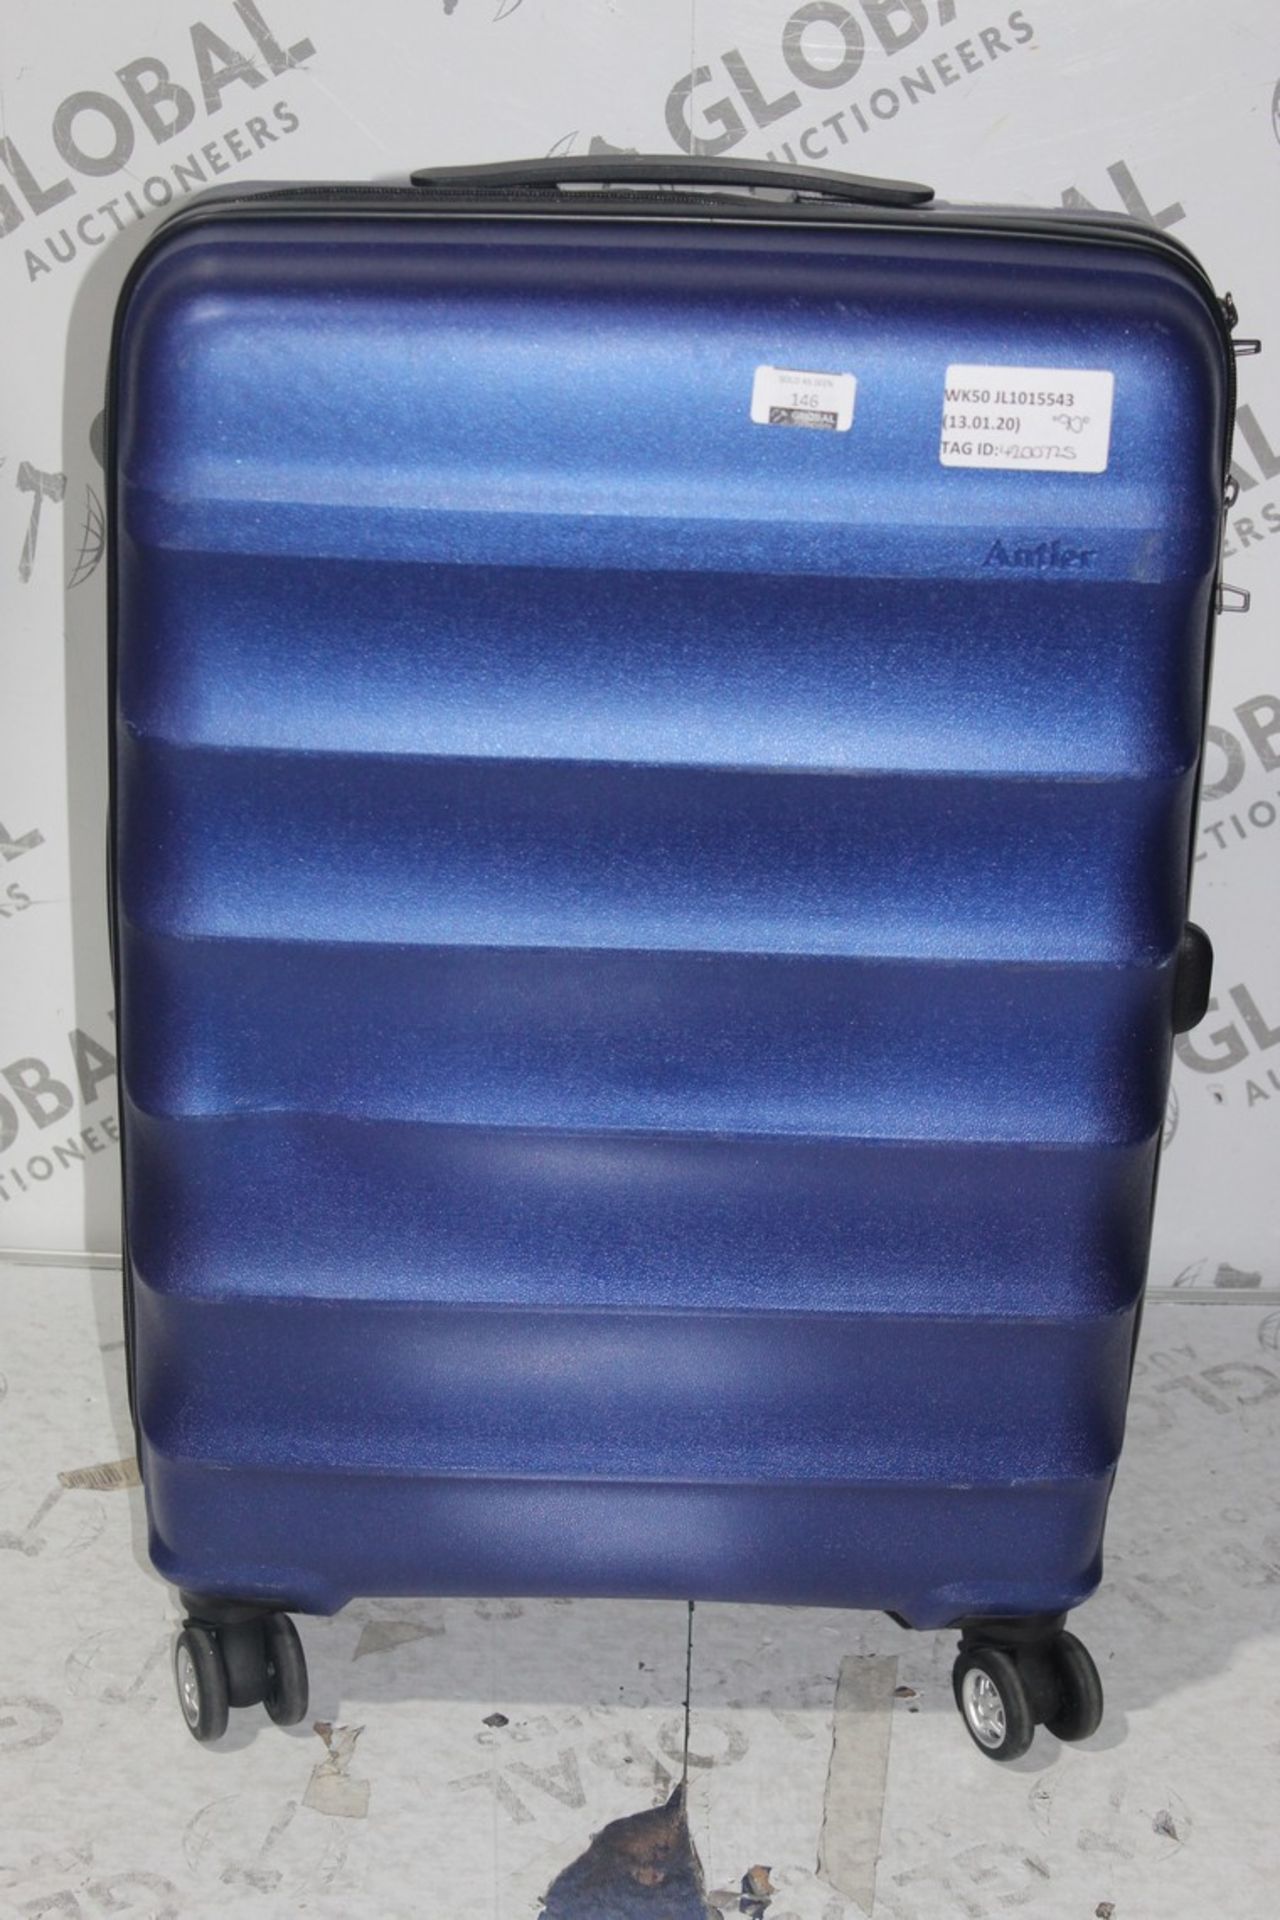 Antler Hard Shell 360 Wheel Medium Sized Suitcase in Midnight Blue RRP £90 (4200725) (Public Viewing